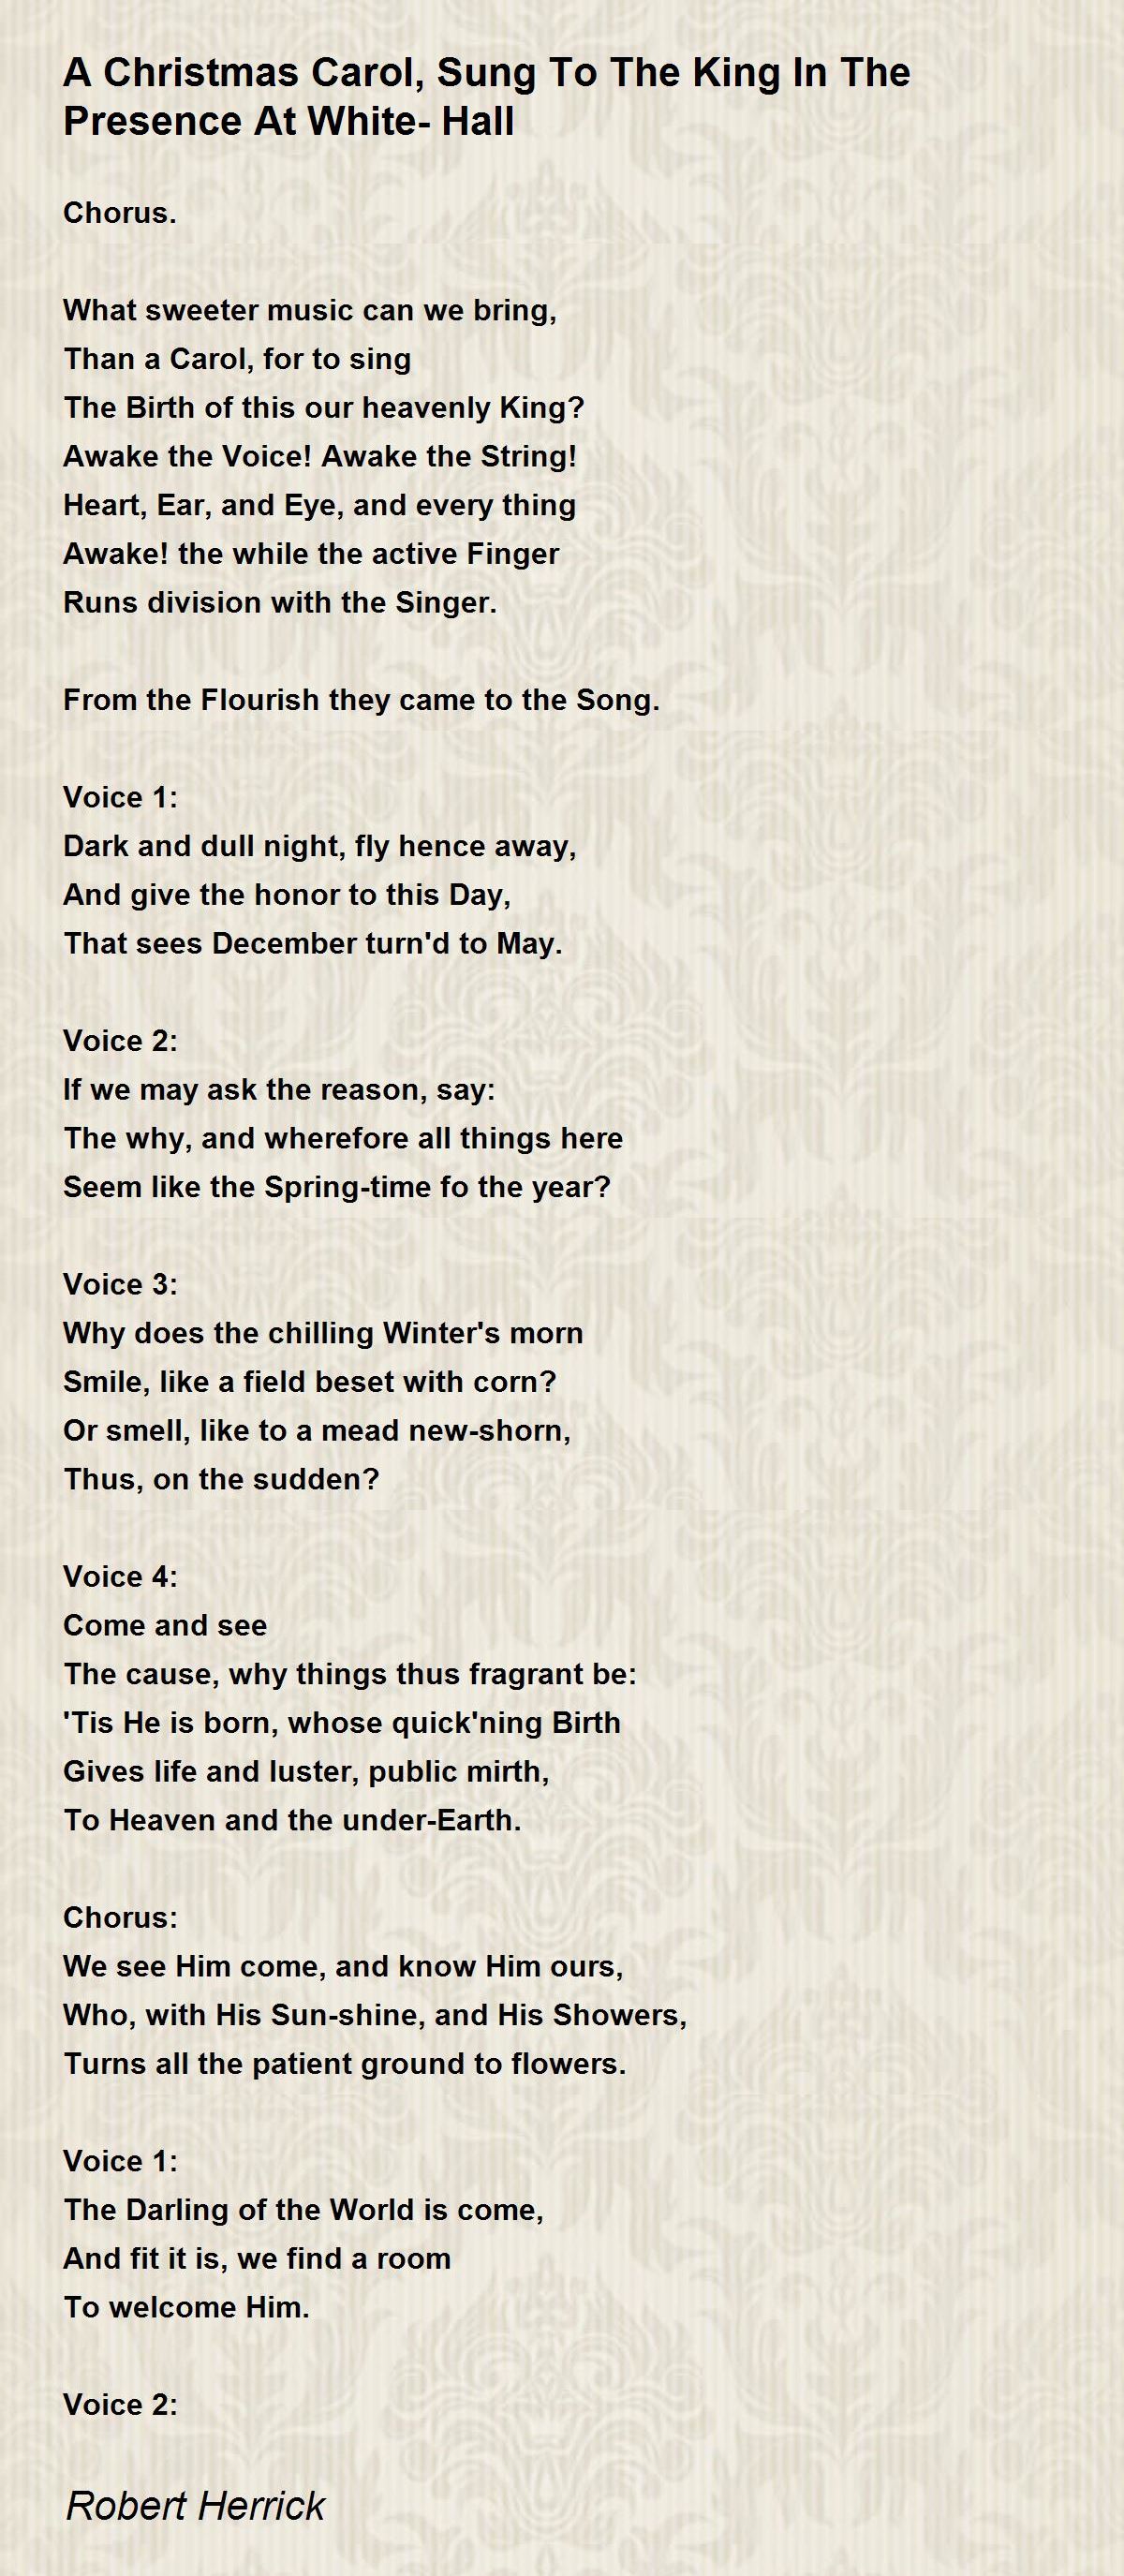 A Christmas Carol, Sung To The King In The Presence At White-Hall Poem by Robert Herrick - Poem ...